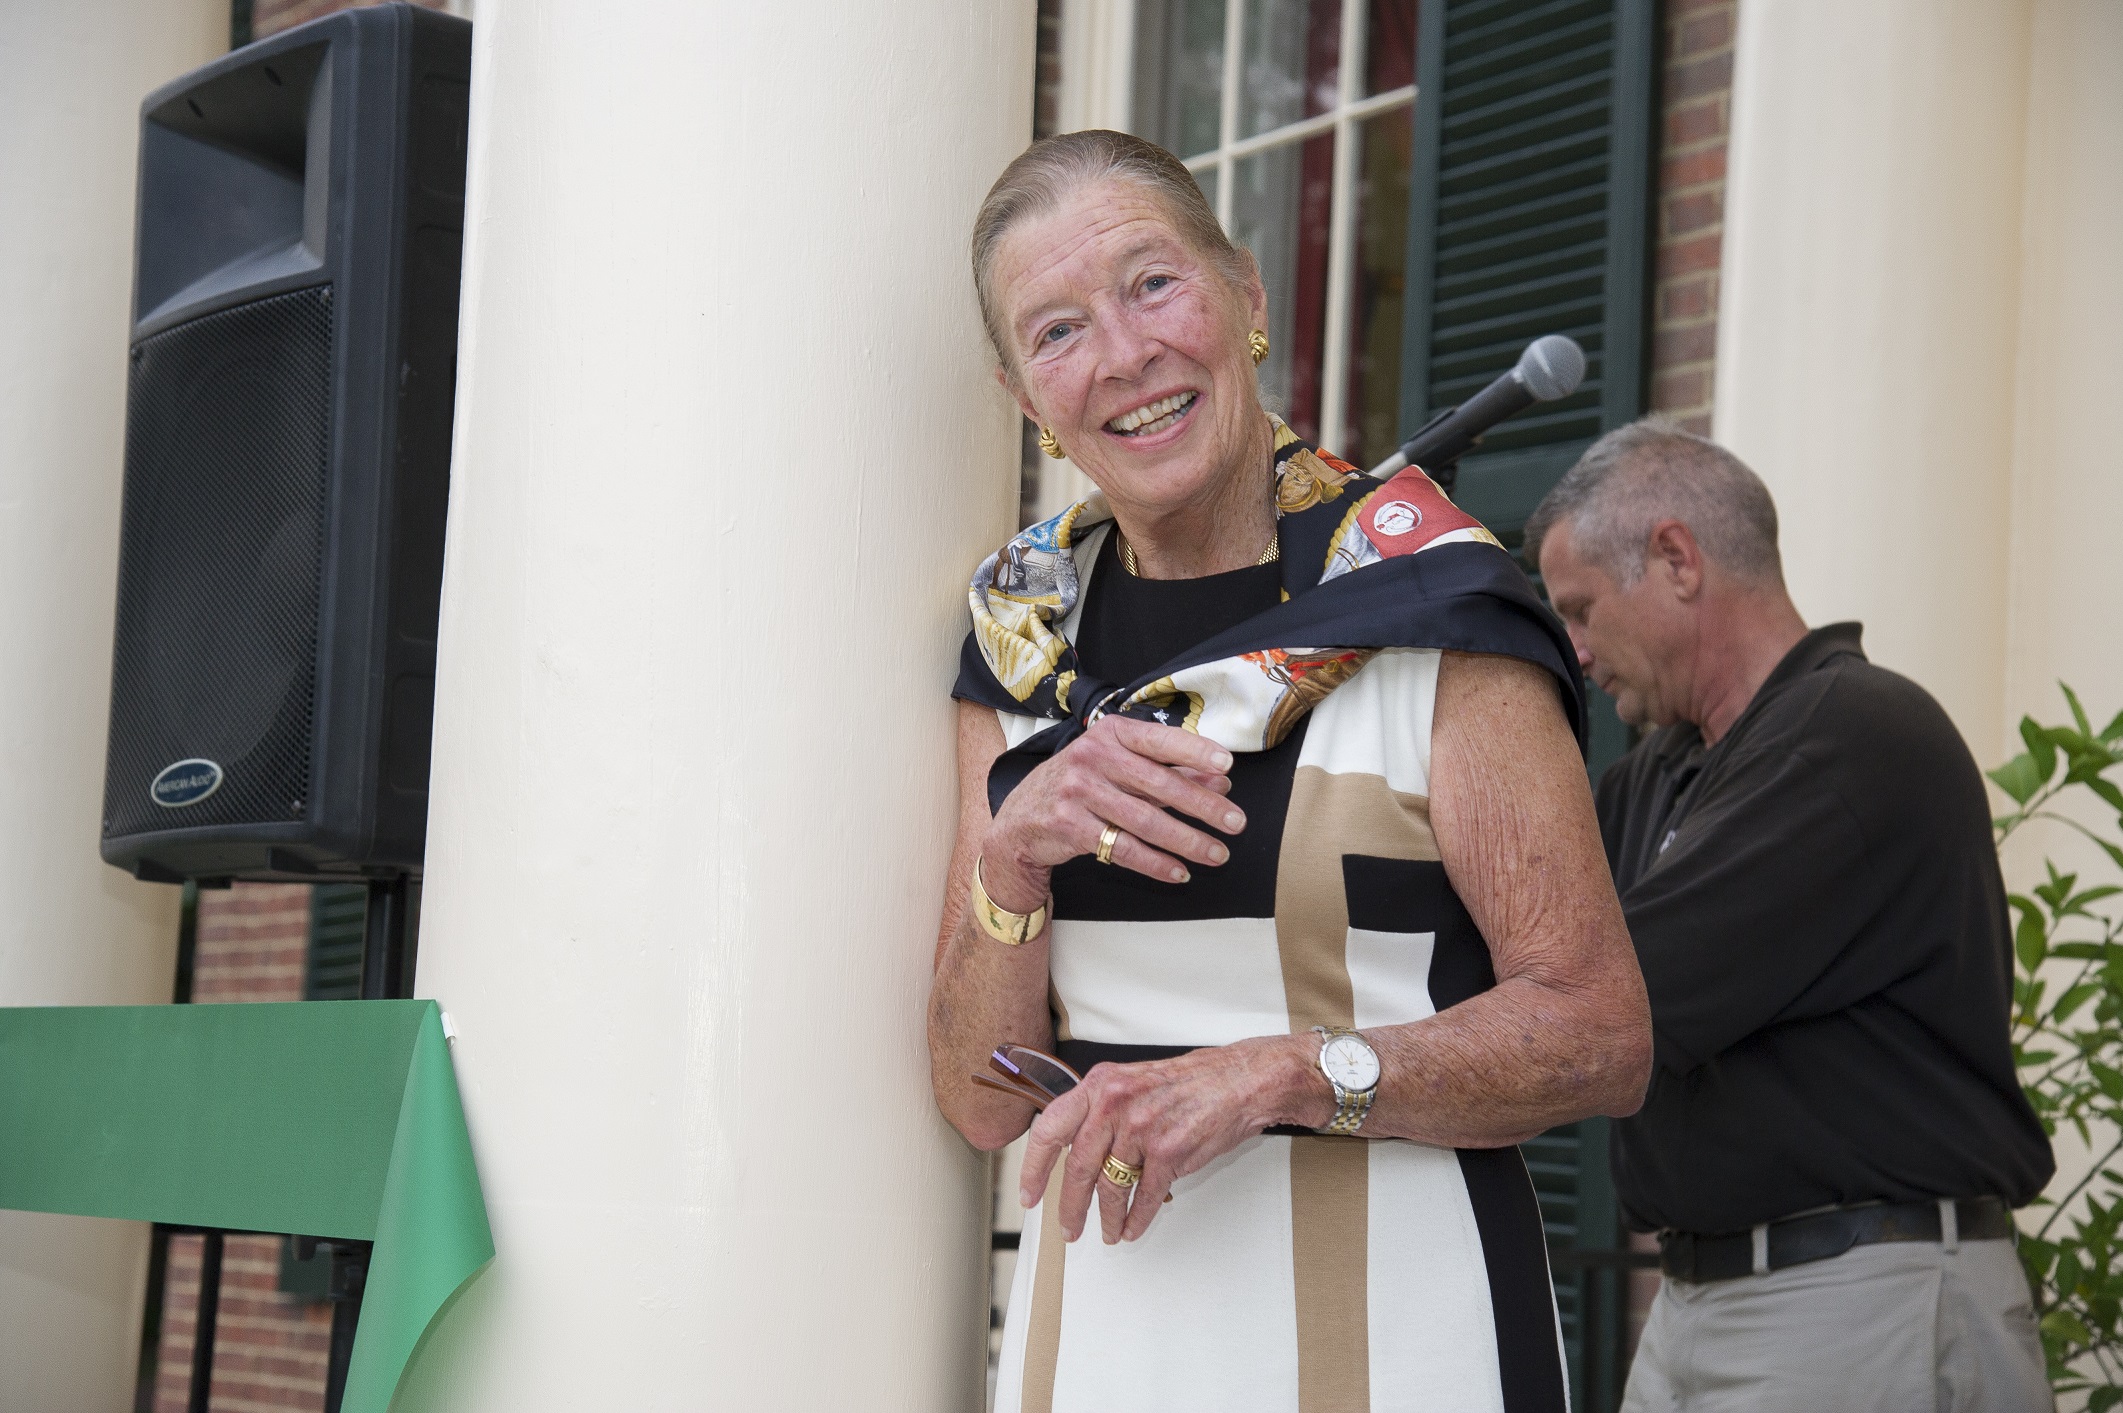 Aurelia Garland Bolton stands on Homewood Museum's South Portico after having cut the green ribbon at the museum's 25th anniversary celebration in 2012.